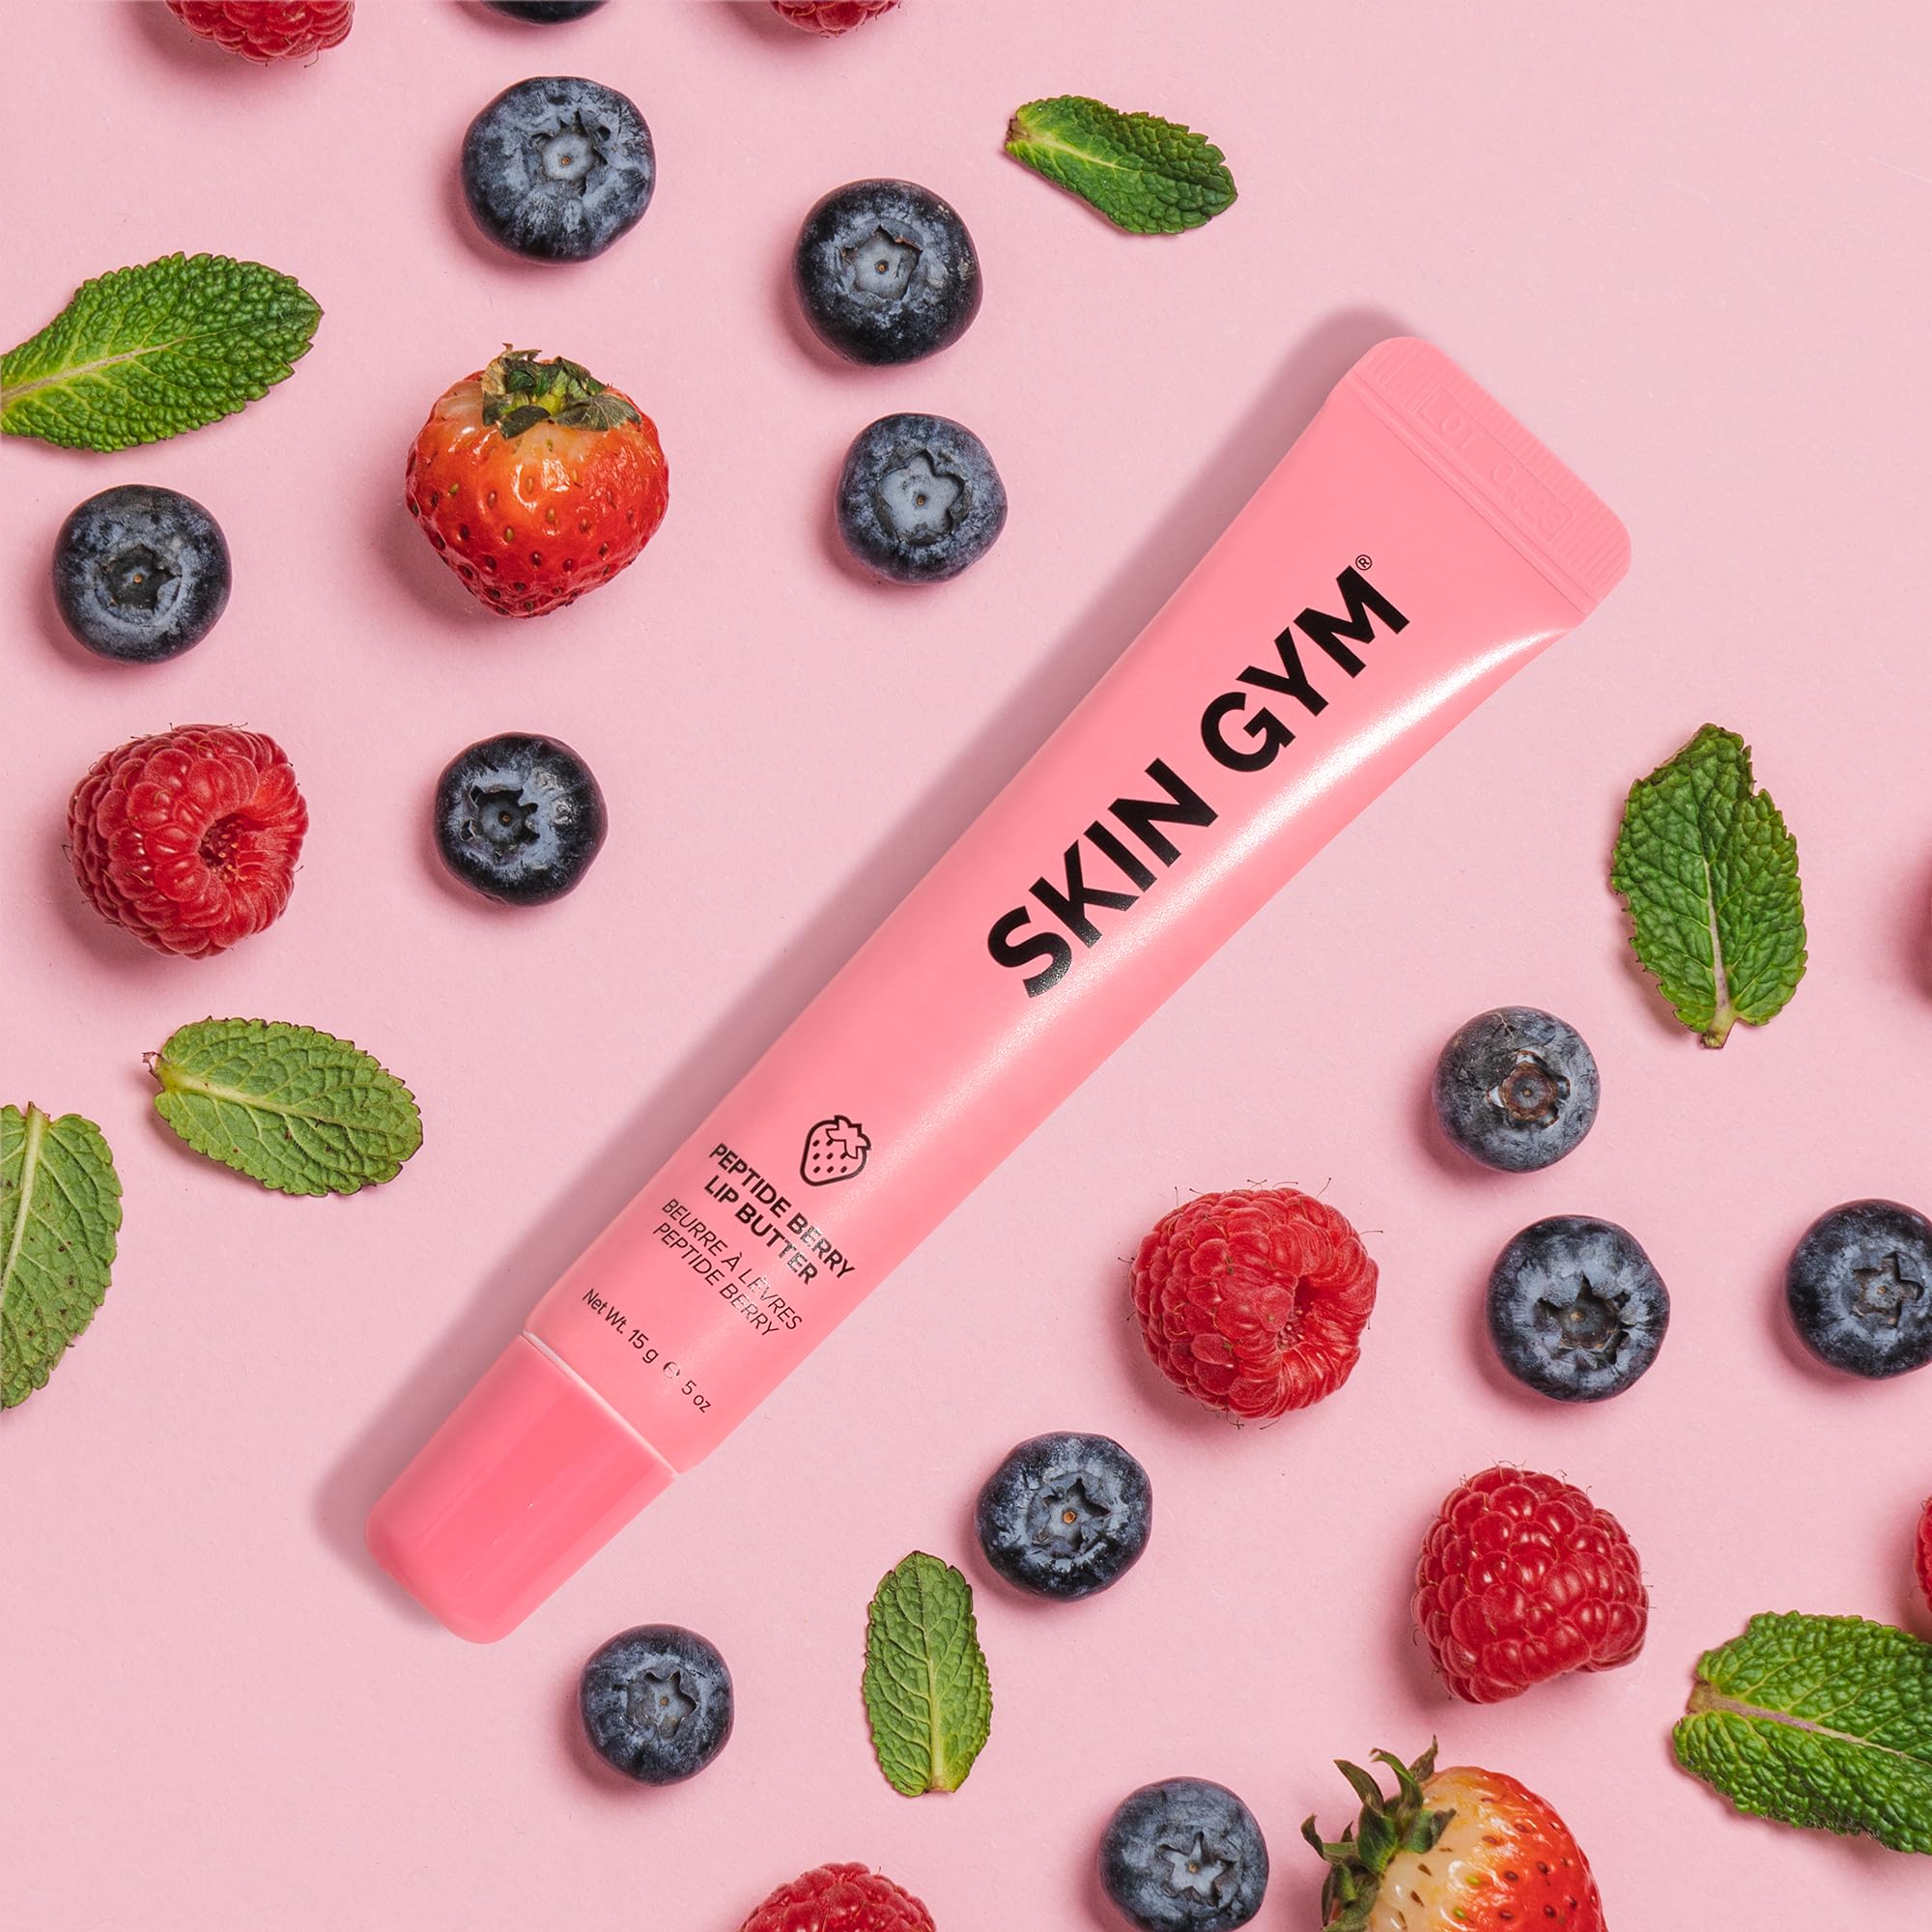 Skin Gym Peptide Berry Lip Butter, Nourishing and Hydrating Lip Balm for Dry Cracked Lips and Fuller, Softer, and Smoother Pout, Juicy Hydration for Irresistible Lips